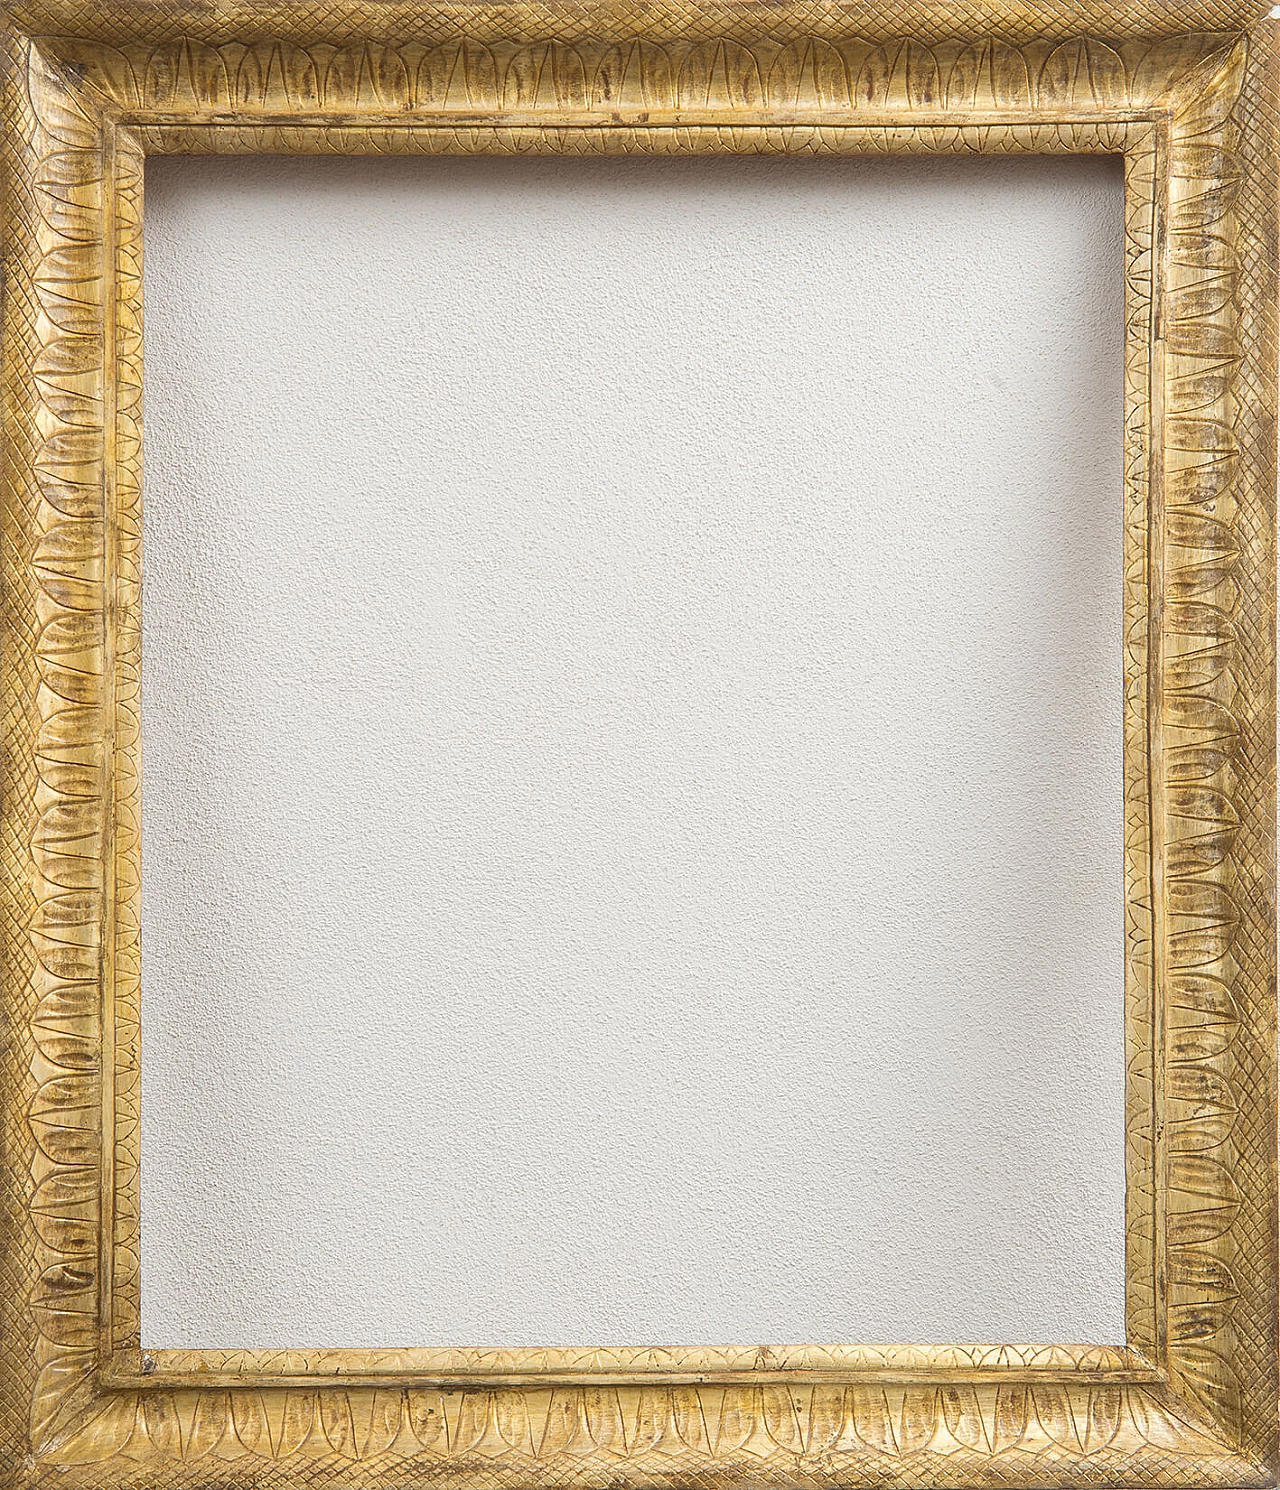 Empire Neapolitan gilded wood frame, early 19th century 1